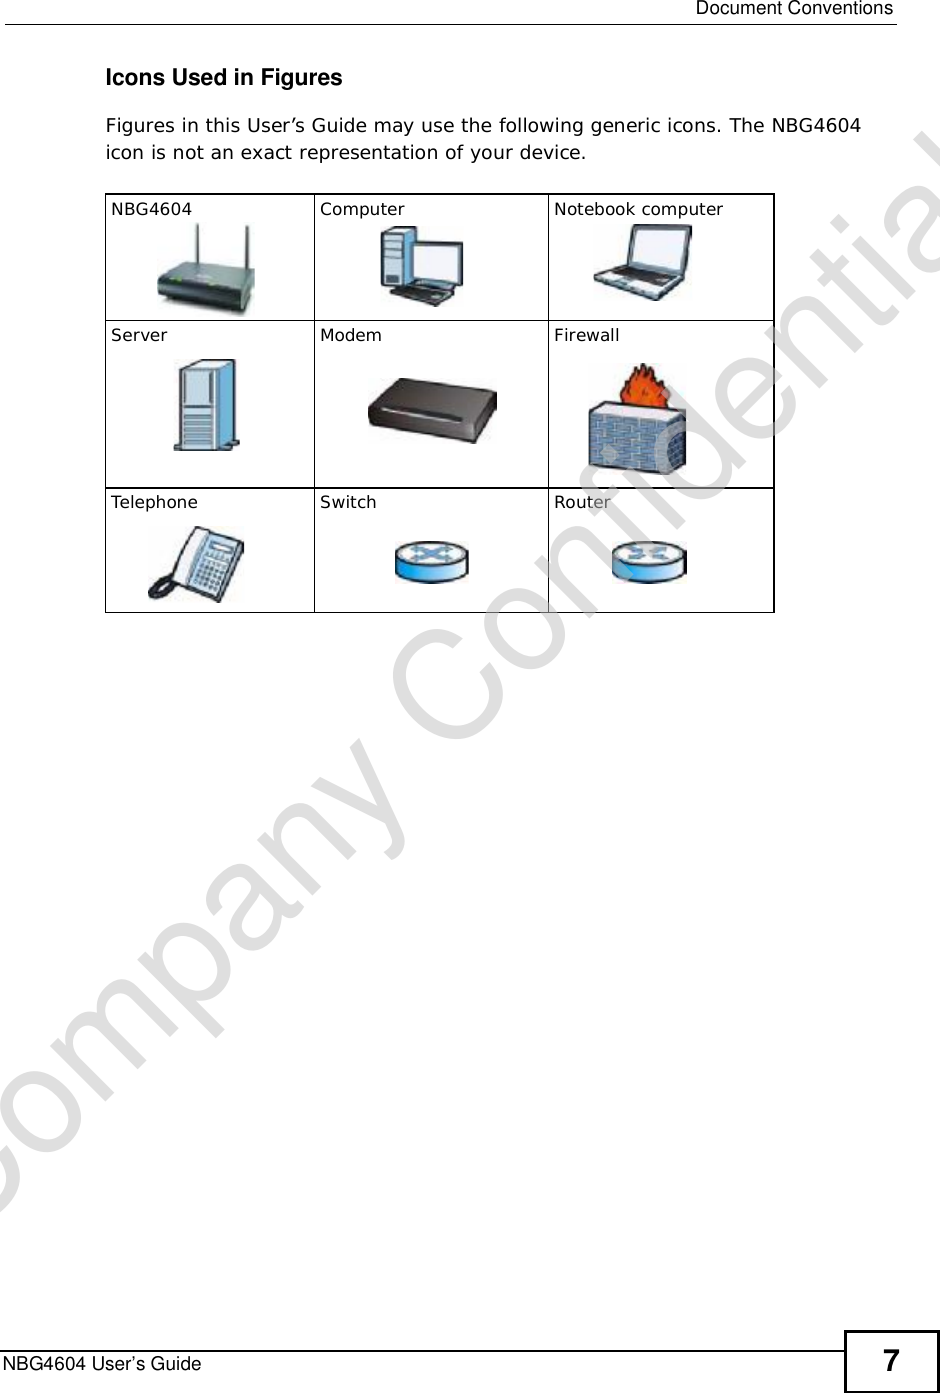  Document ConventionsNBG4604 User’s Guide 7Icons Used in FiguresFigures in this User’s Guide may use the following generic icons. The NBG4604 icon is not an exact representation of your device.NBG4604 Computer Notebook computerServer Modem FirewallTelephone Switch RouterCompany Confidential